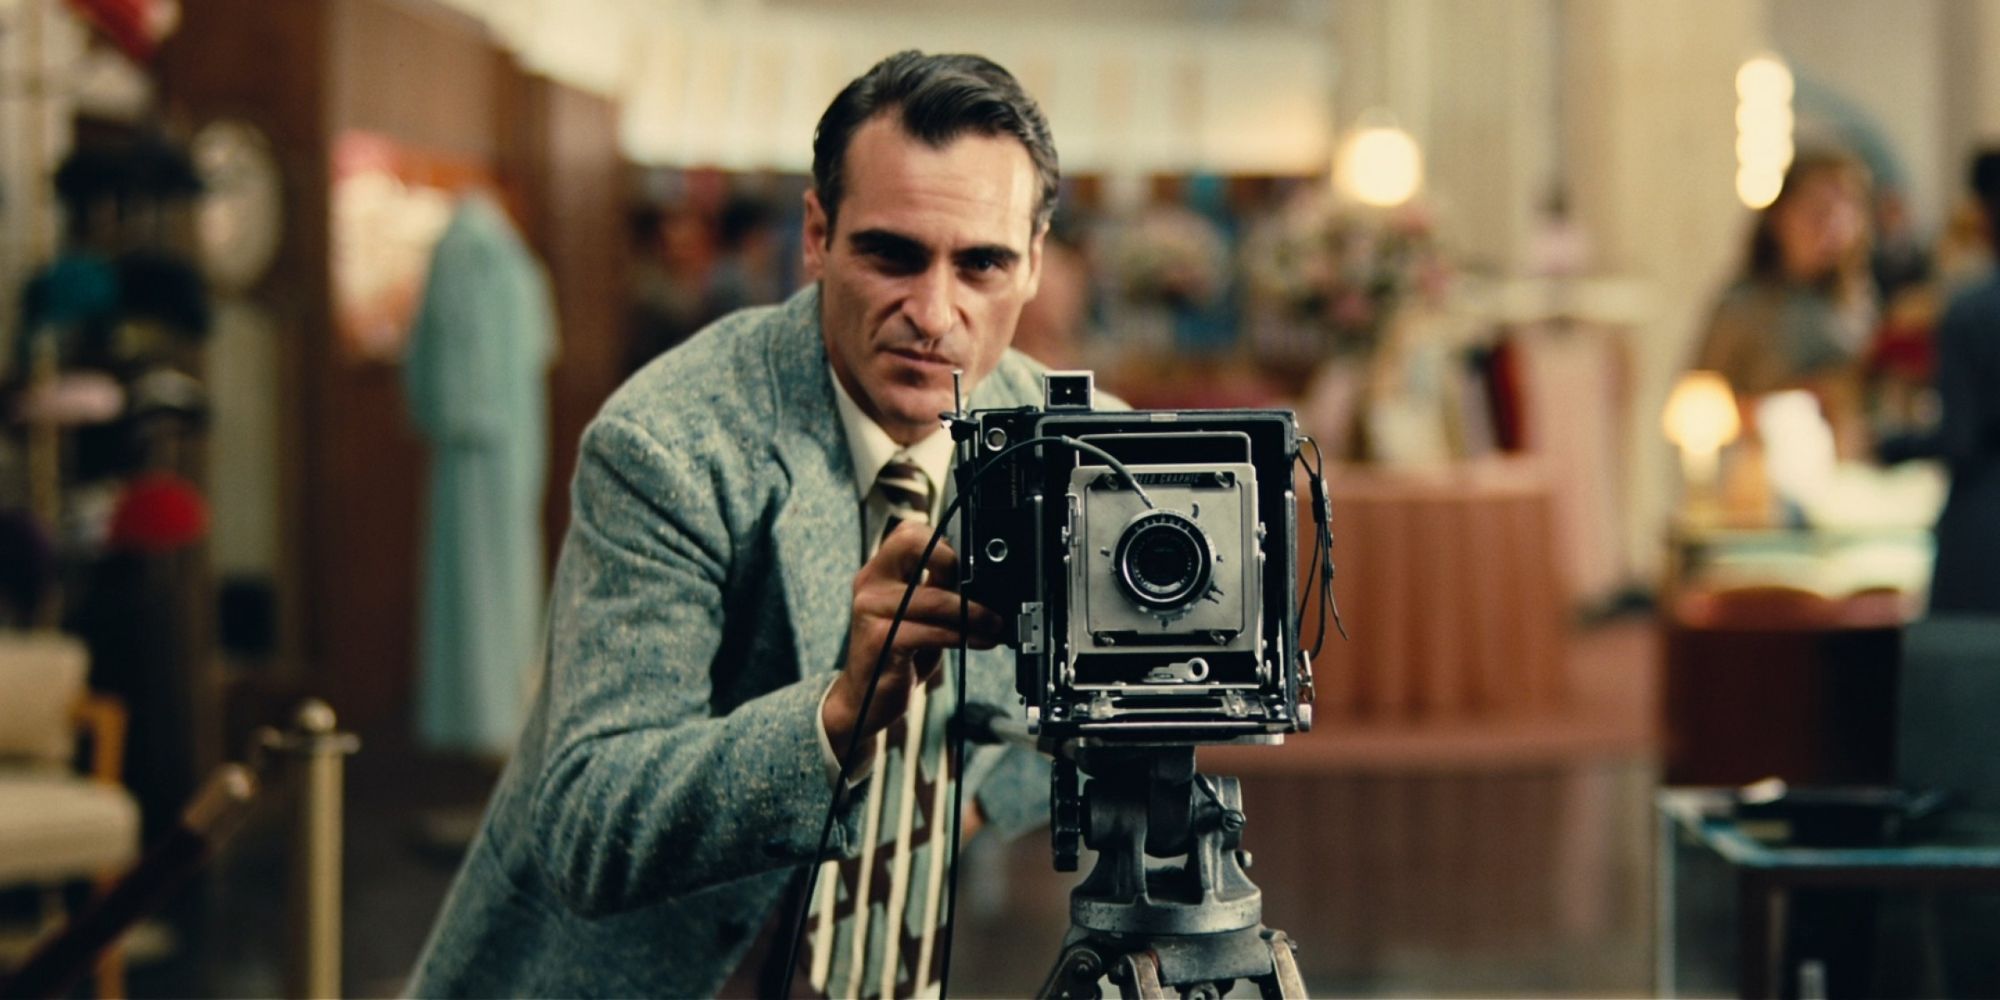 Freddie working as a photographer in a department store in 'The Master'